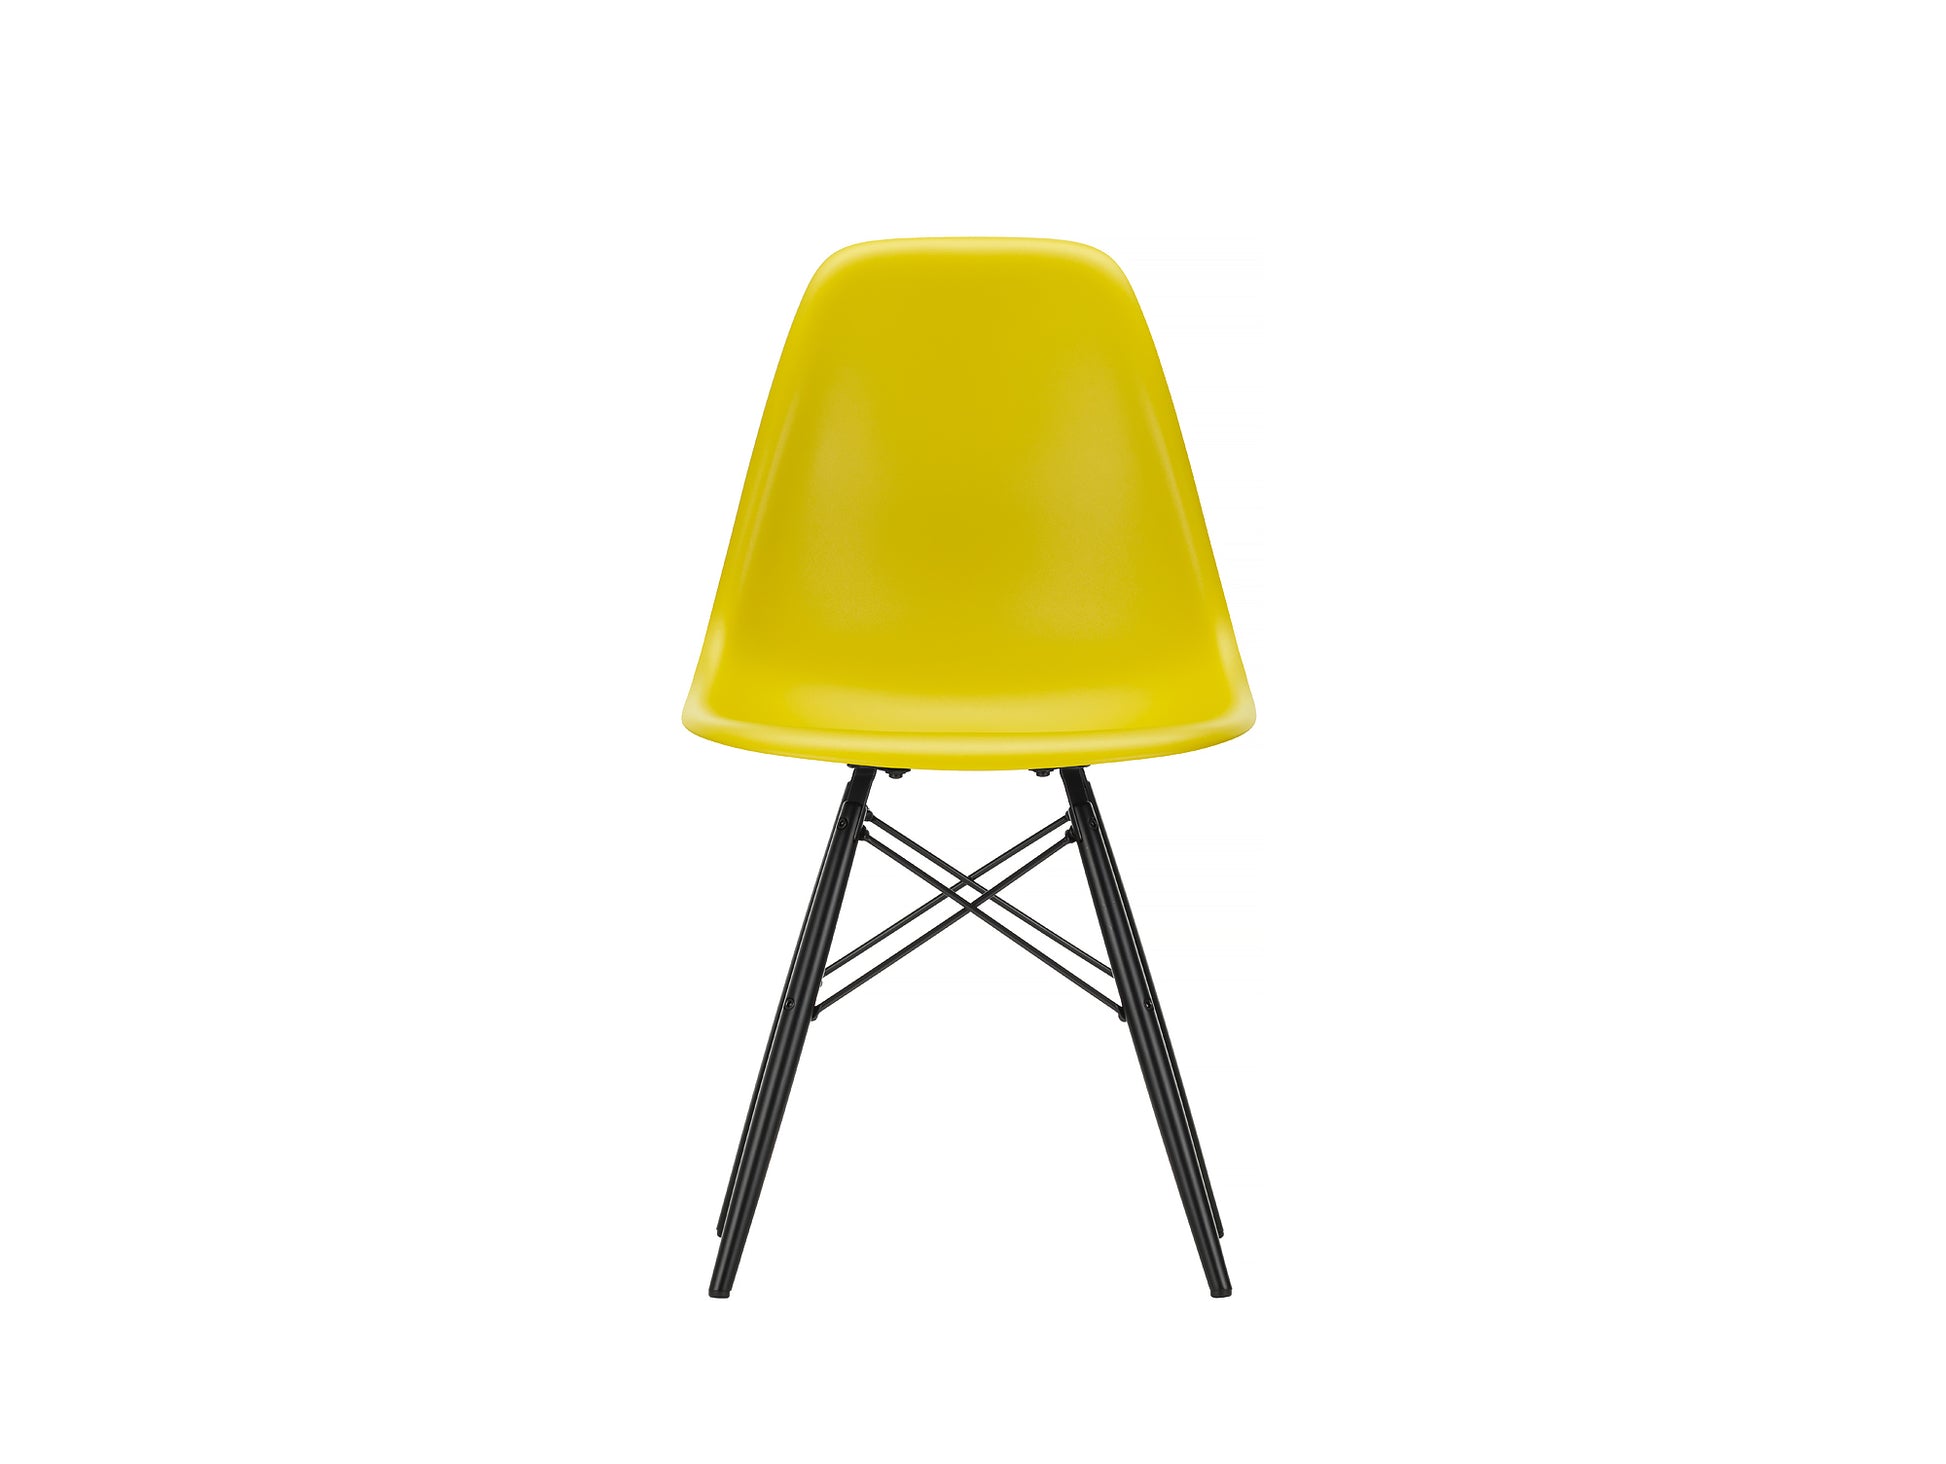 Vitra Eames DSW Plastic Side Chair - Mustard 34